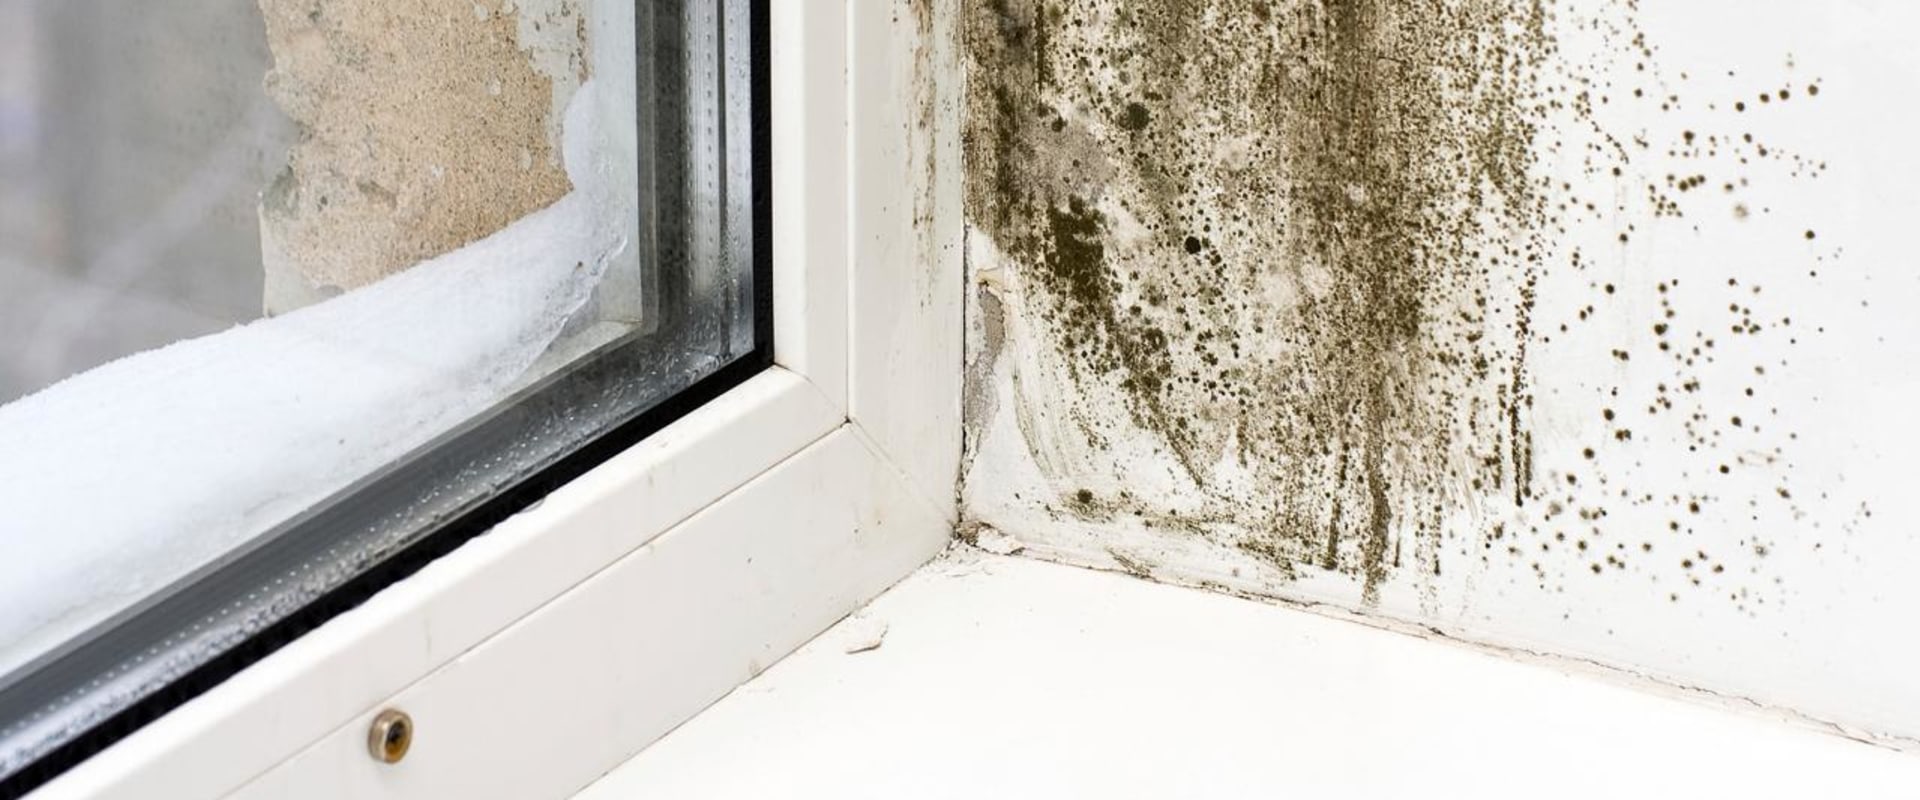 How to Identify and Treat Mold Growth in Affected Areas